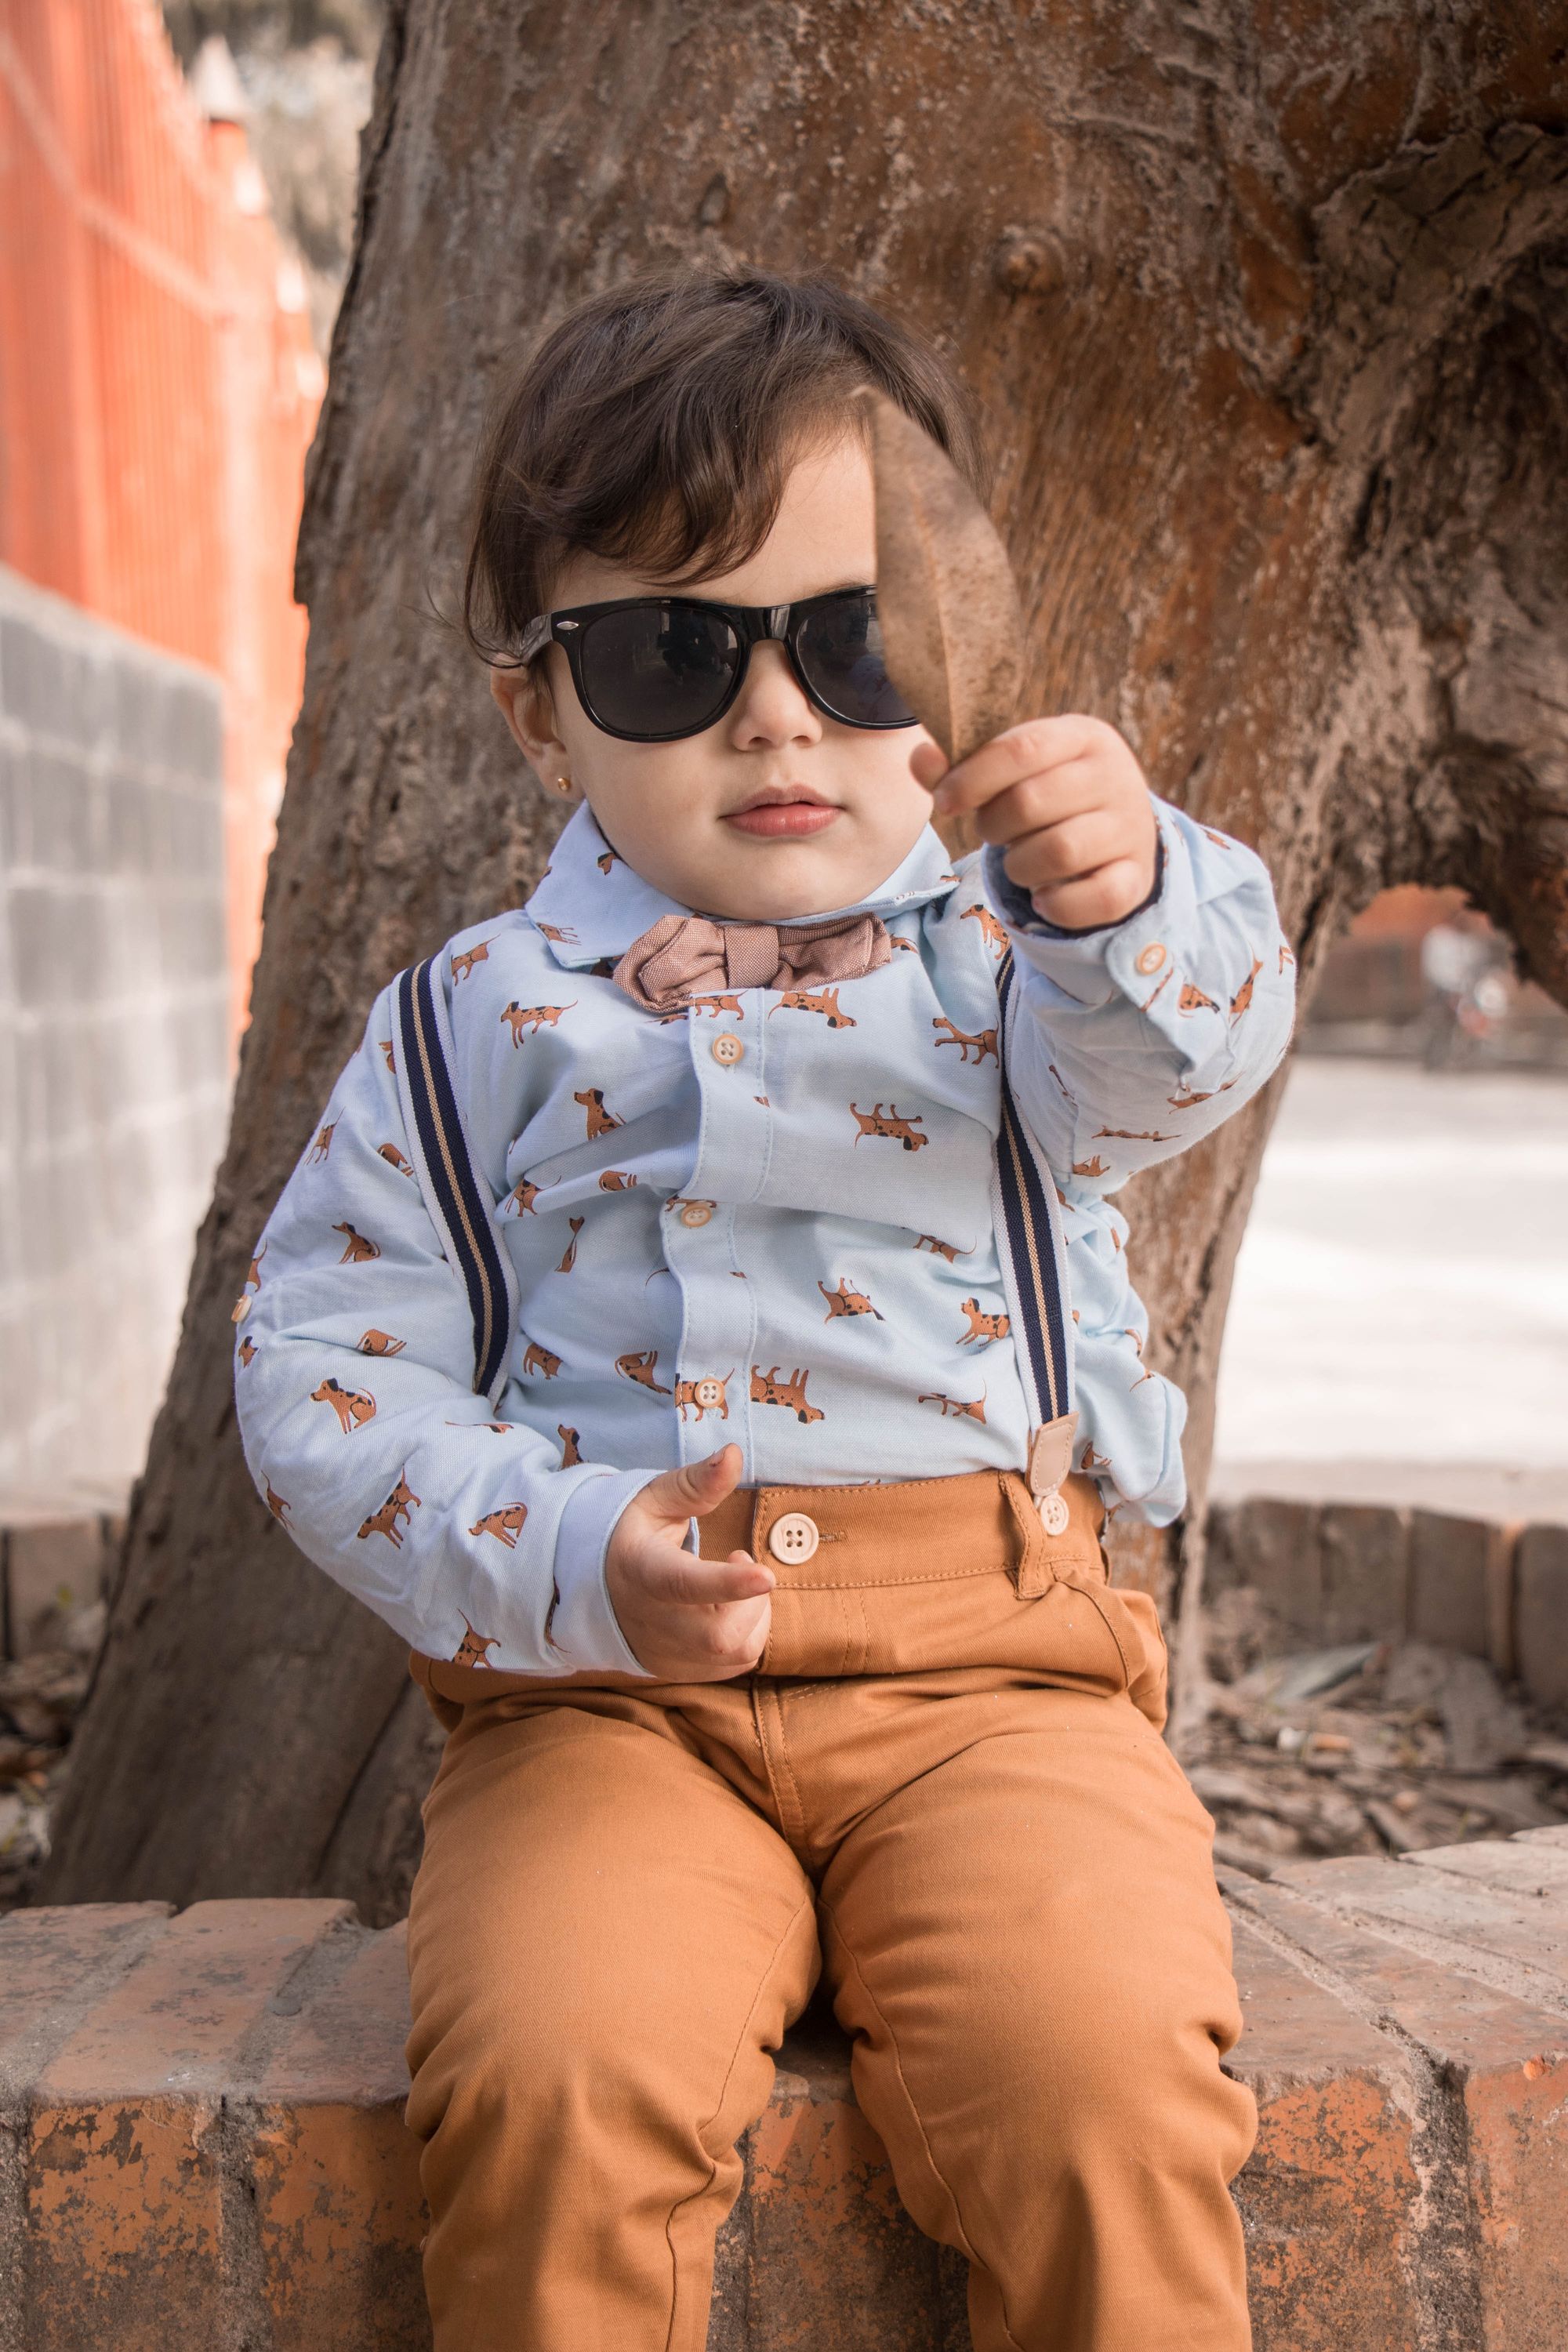 How to Choose the Right Baby Sunglasses, According to a Pediatrician.